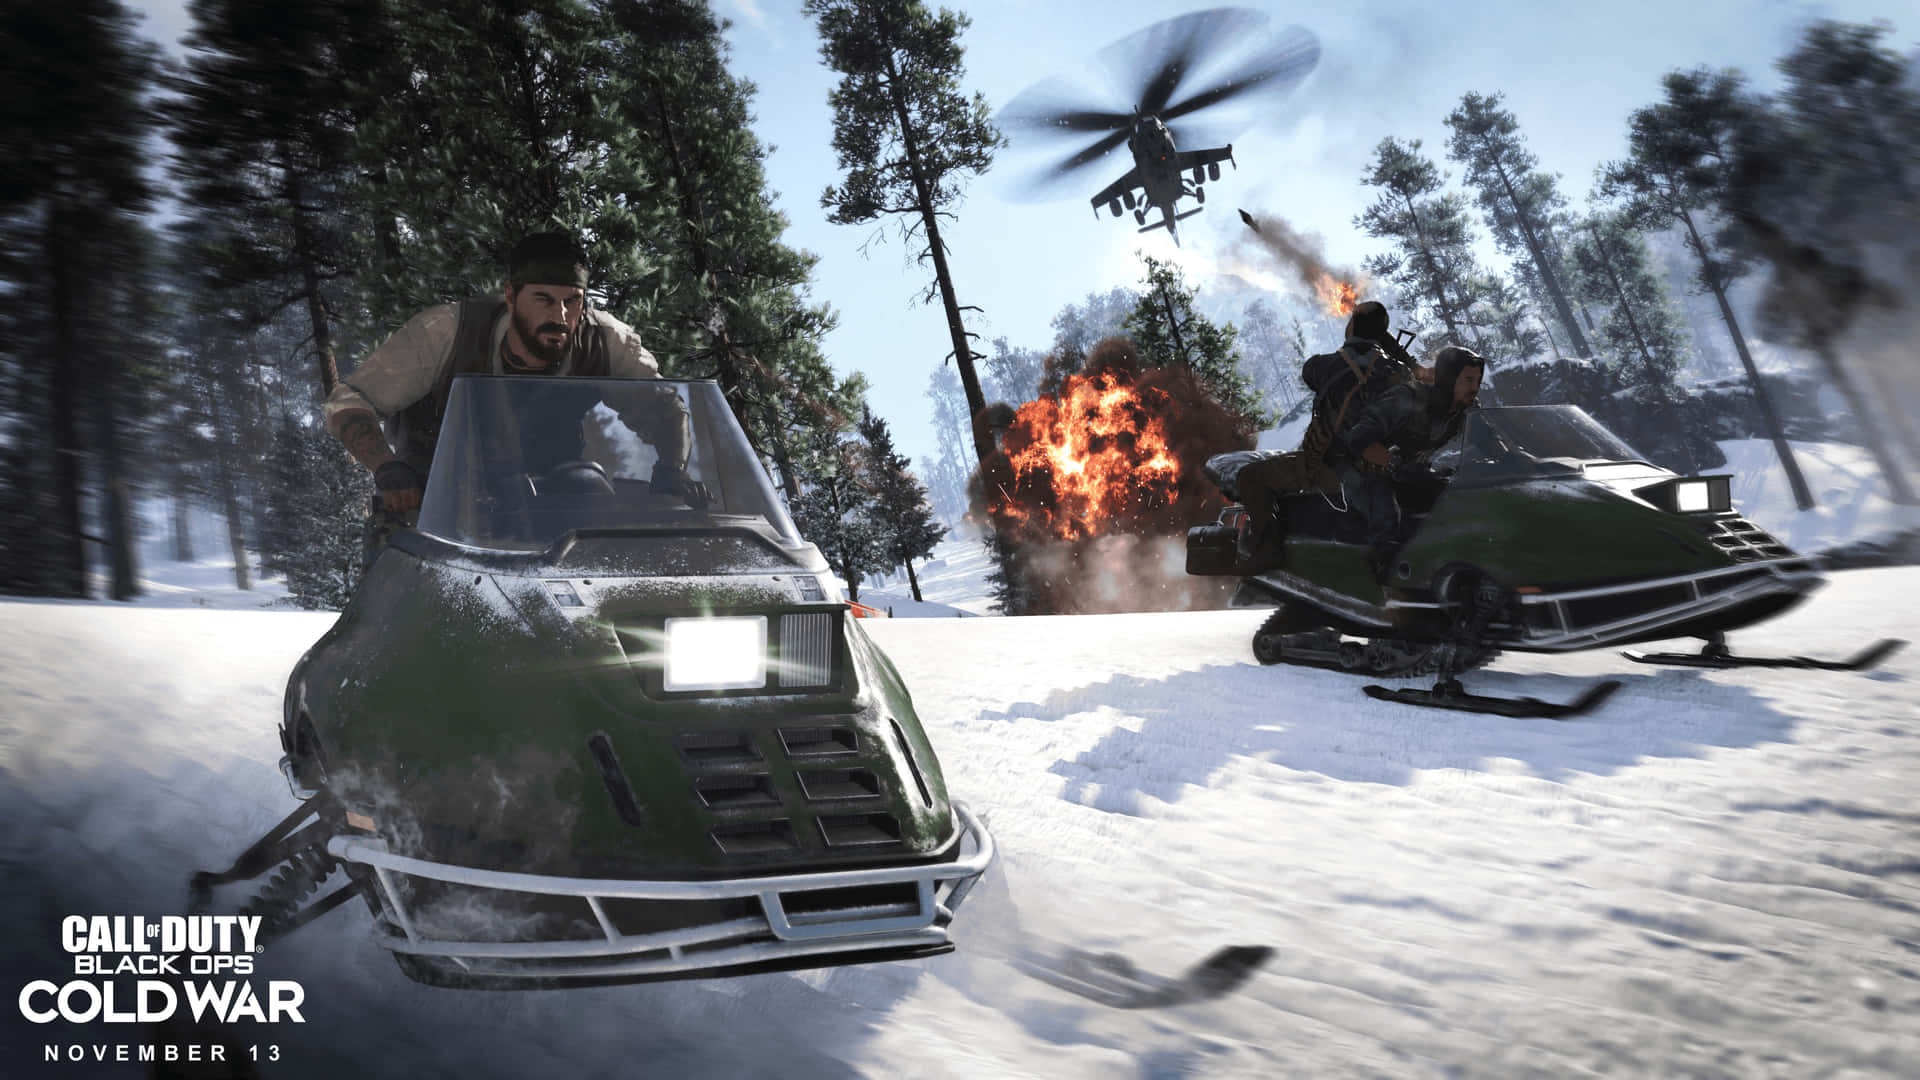 Uncover the story behind the Cold War with Call of Duty: Black Ops Cold War